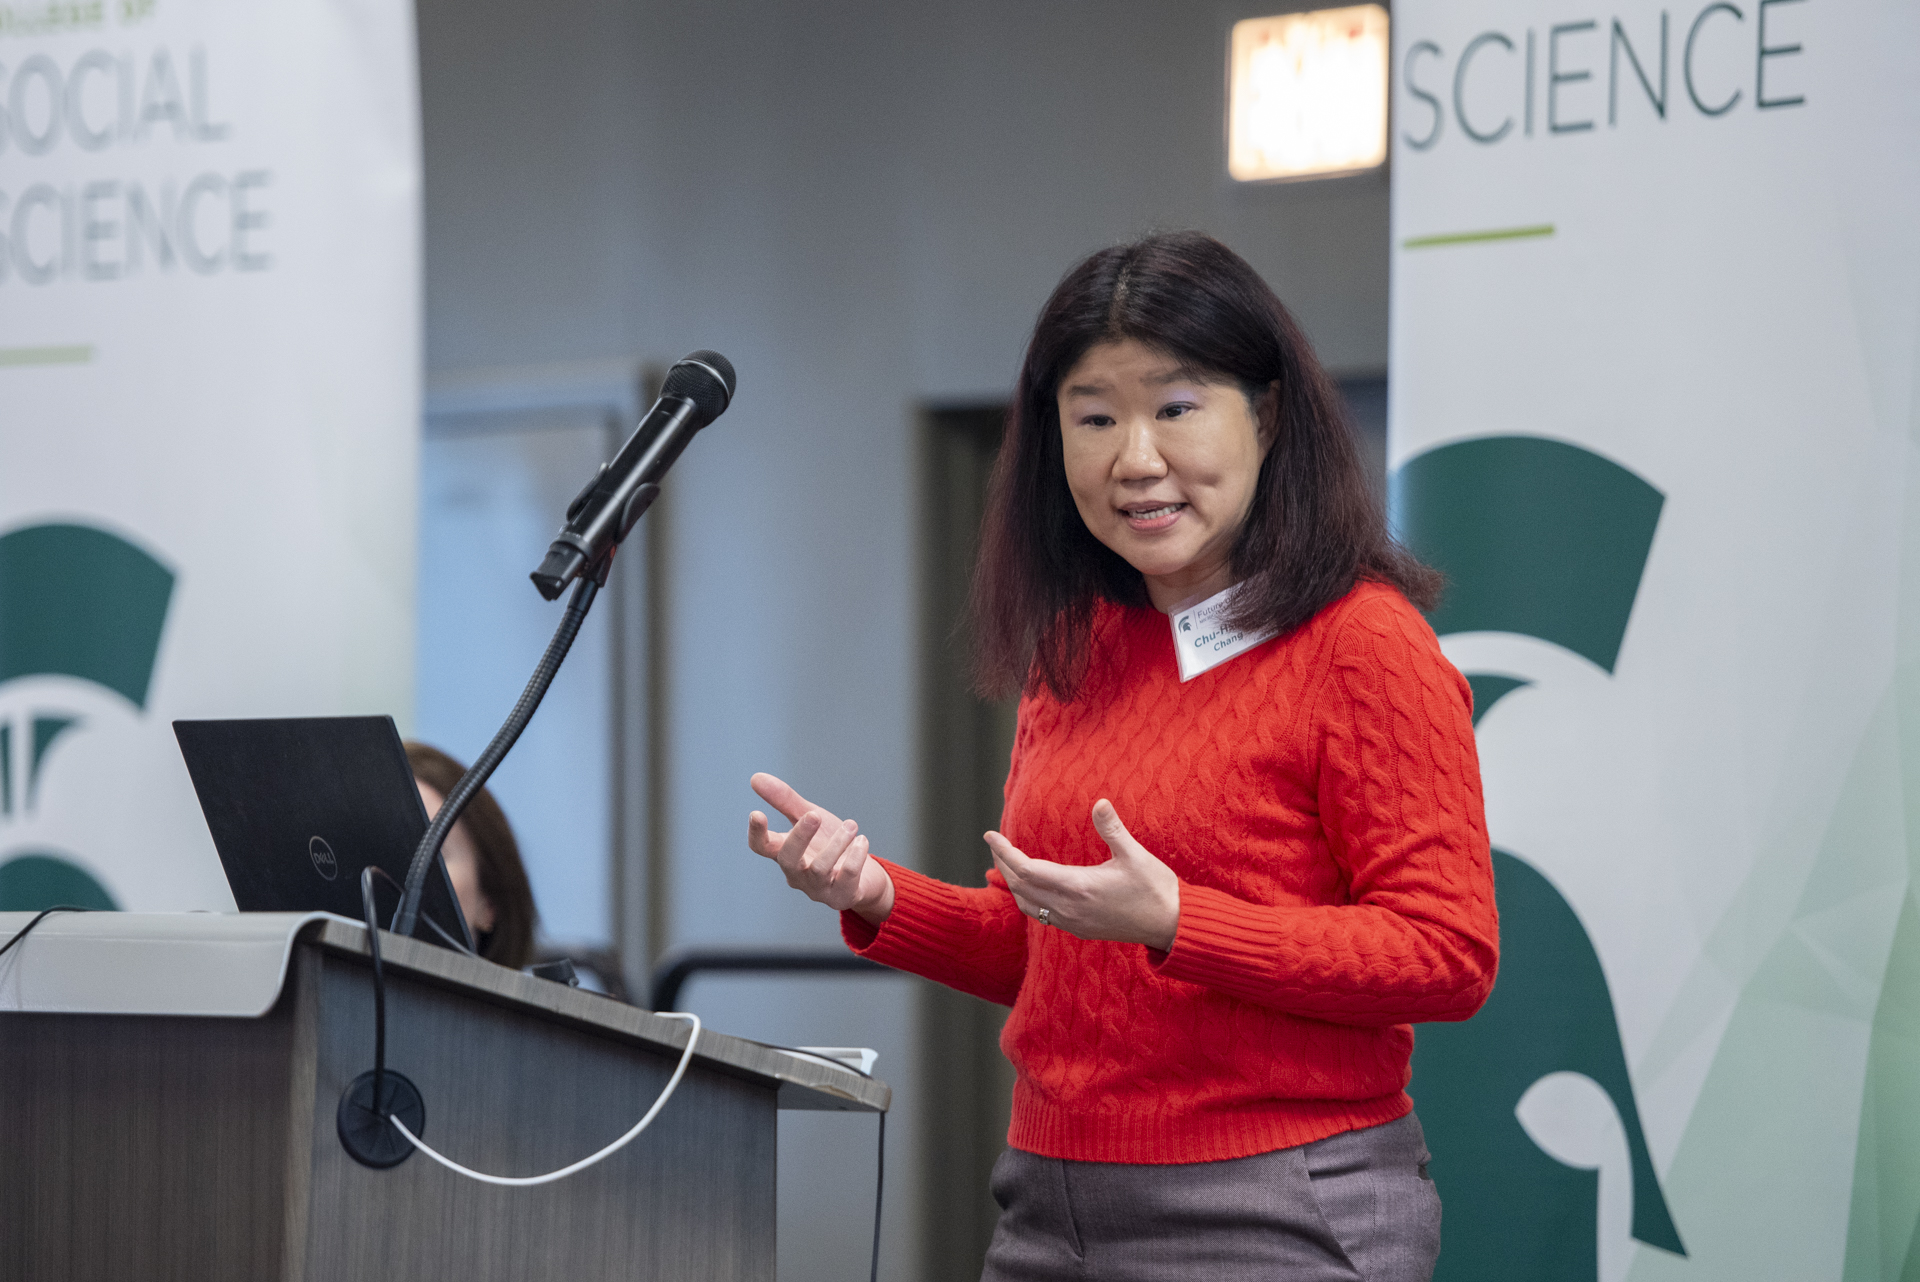 Daisy Chang presenting about her research at the Future of Work event.